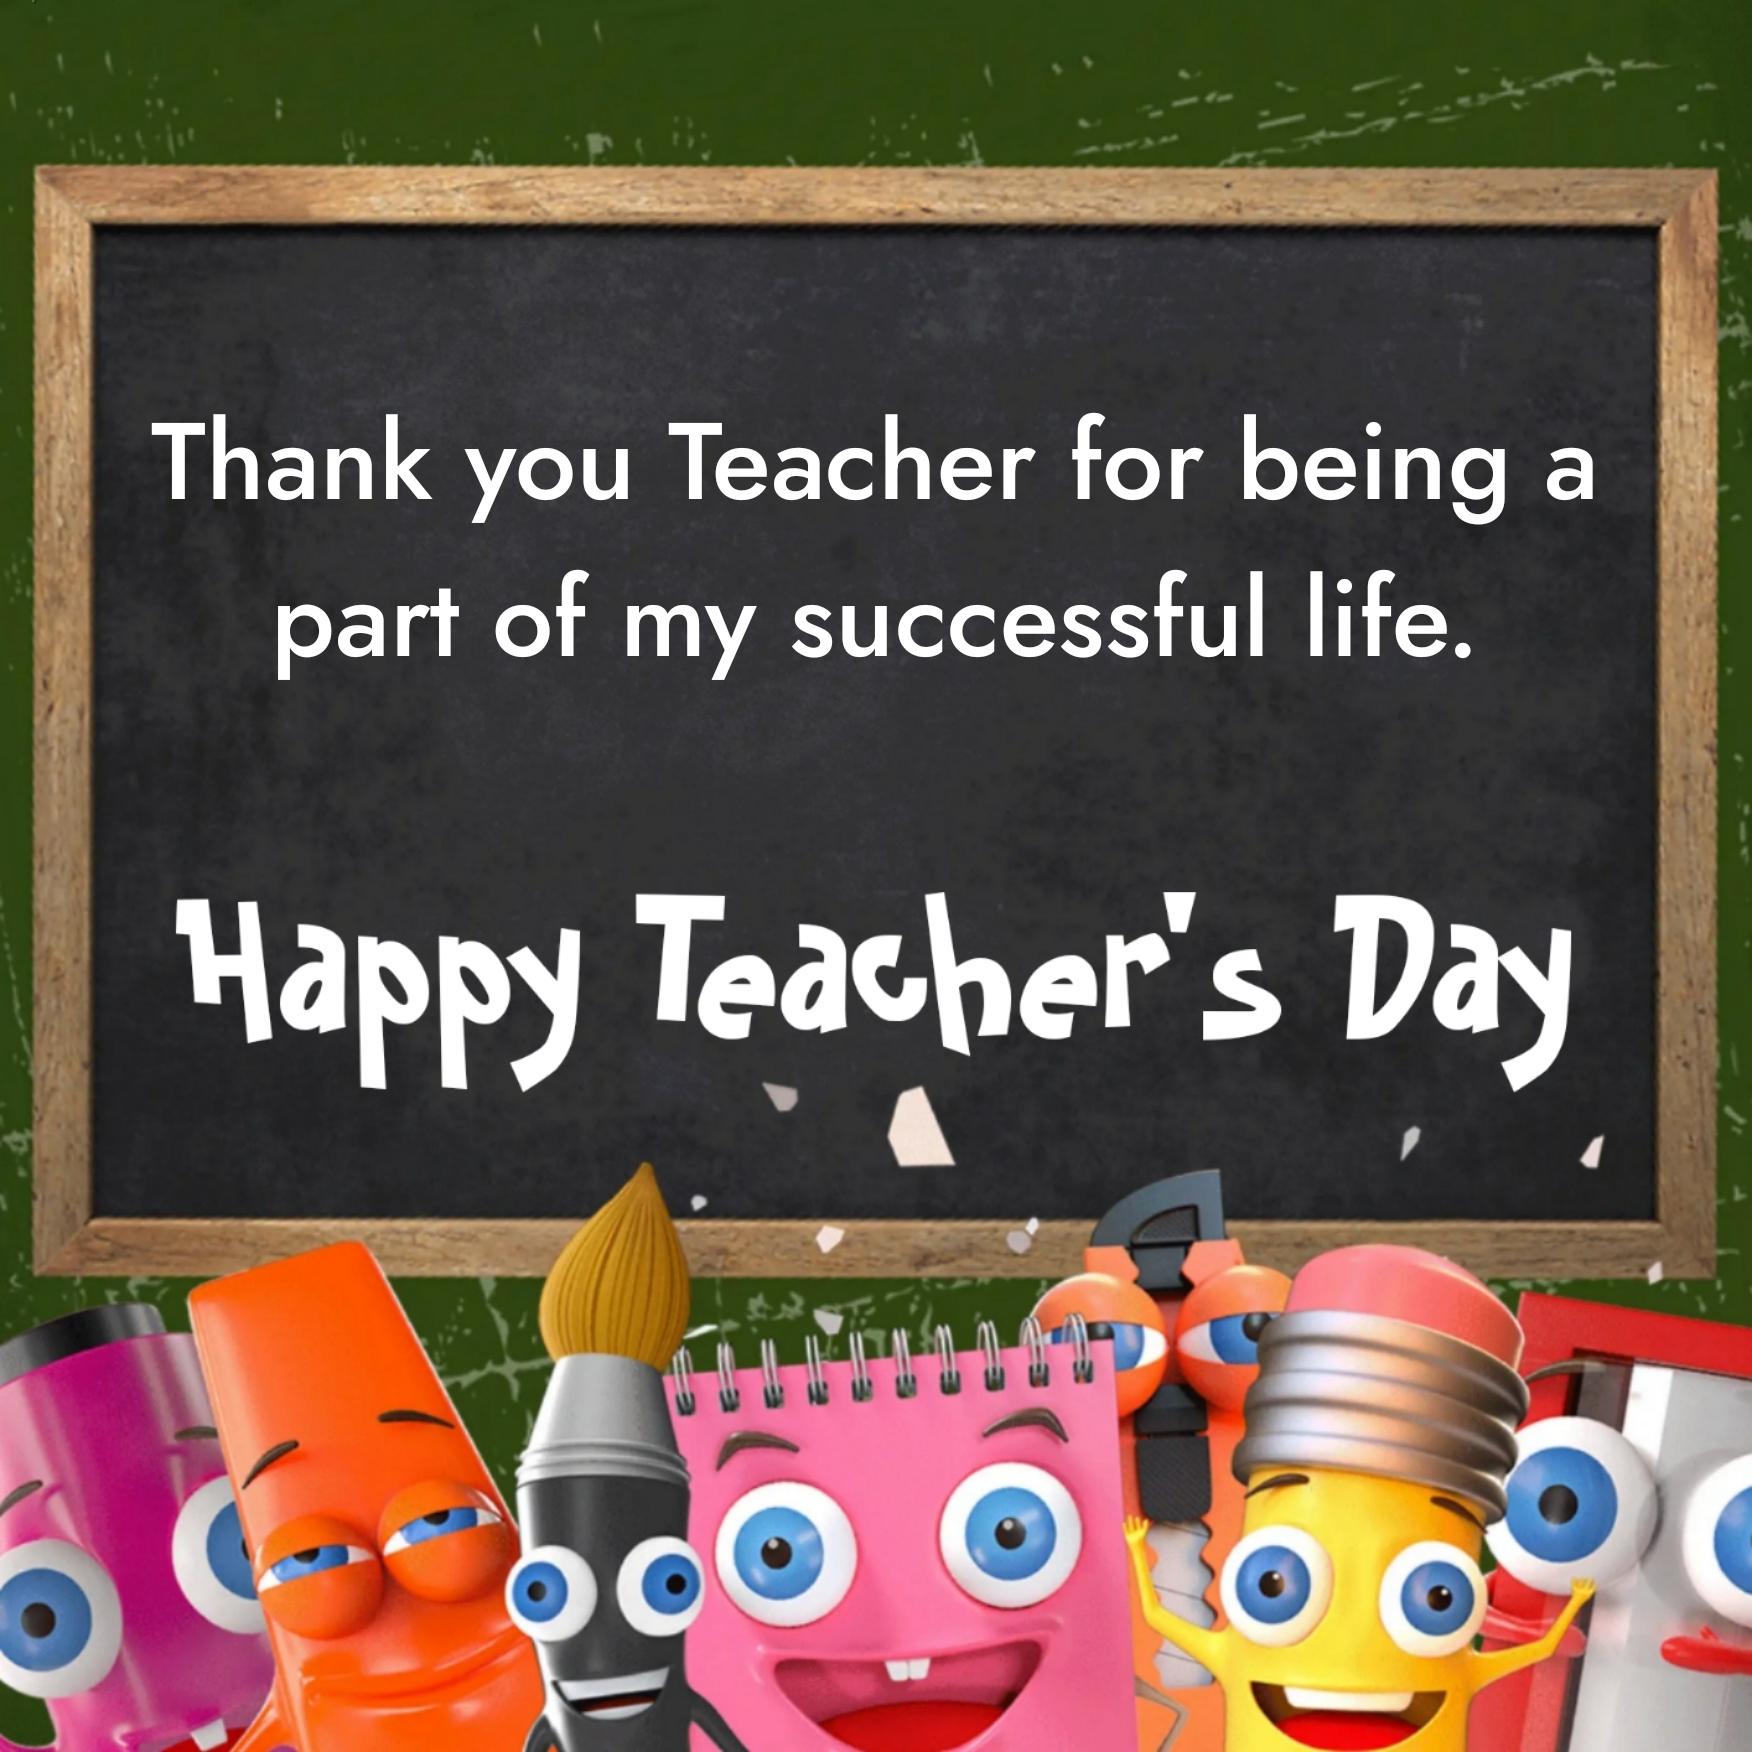 Thank you Teacher for being a part of my successful life